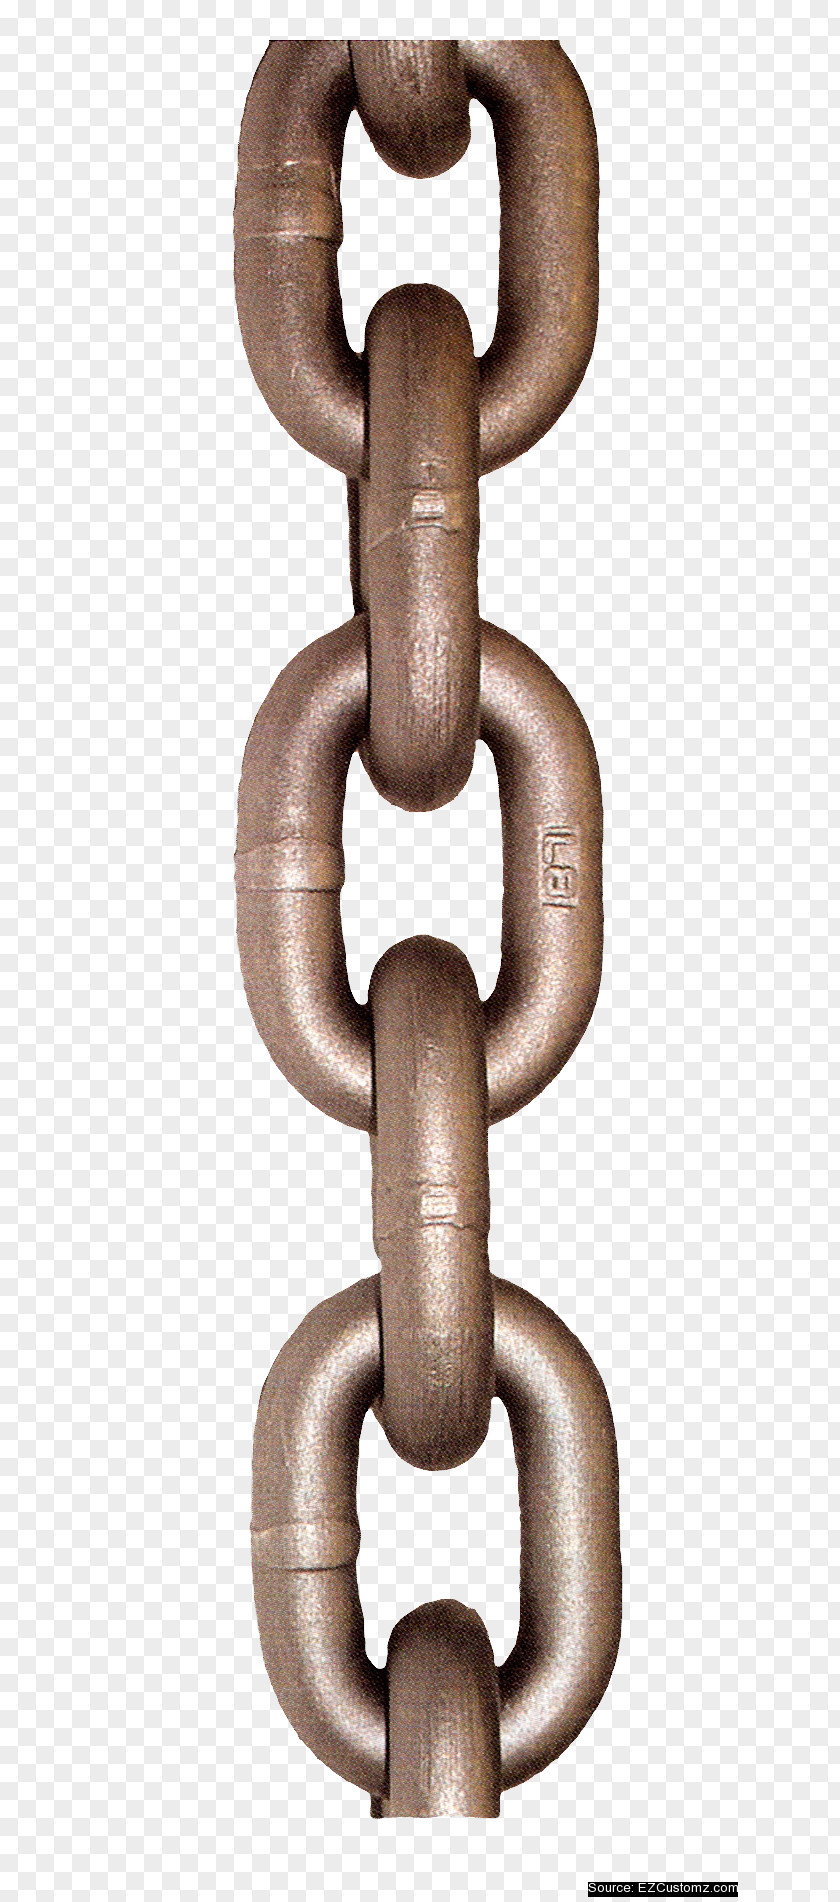 Chain Brass Manufacturing Industry Hoist PNG